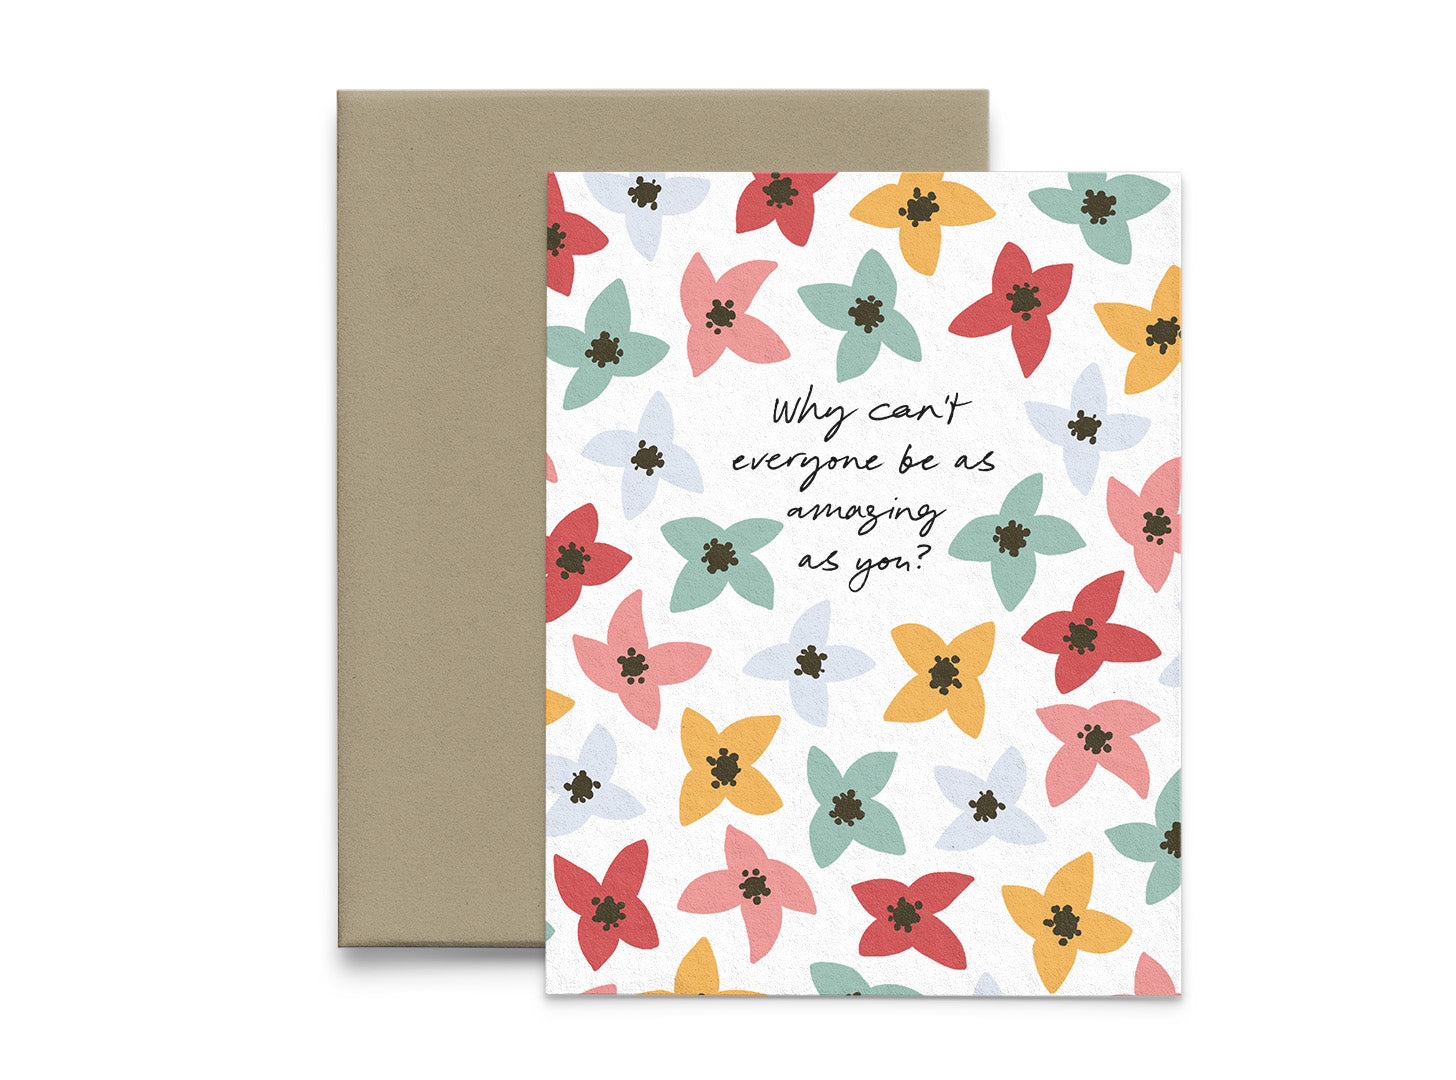 Amazing as You Encouragement Greeting Card